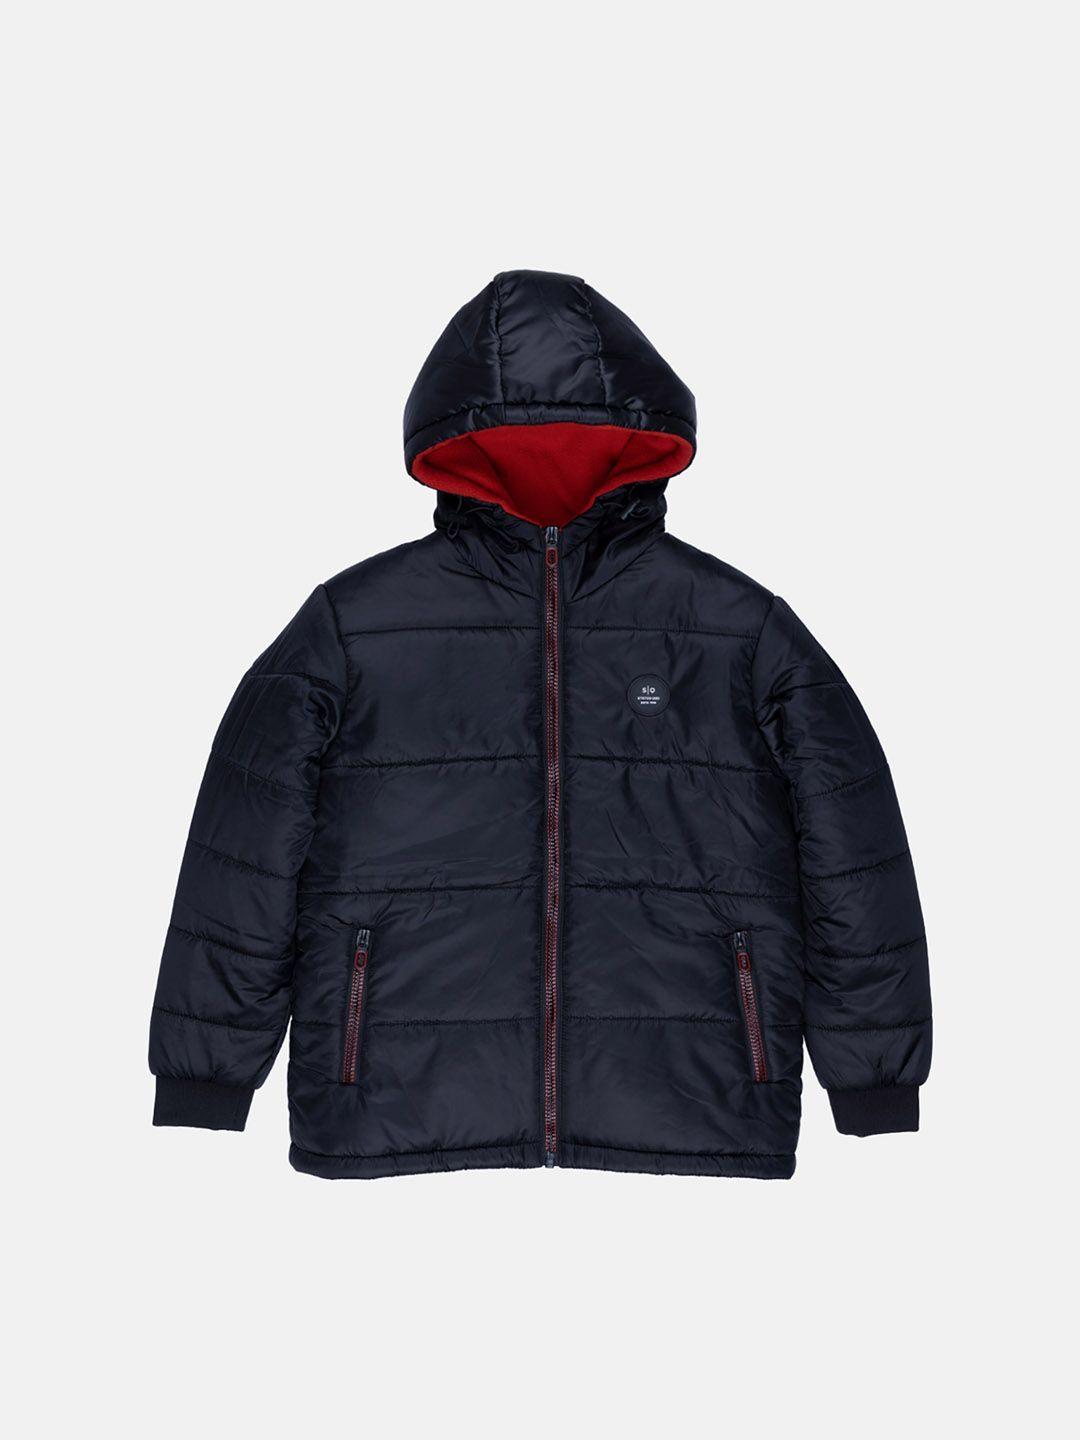 status quo boys black red quilted hooded puffer jacket